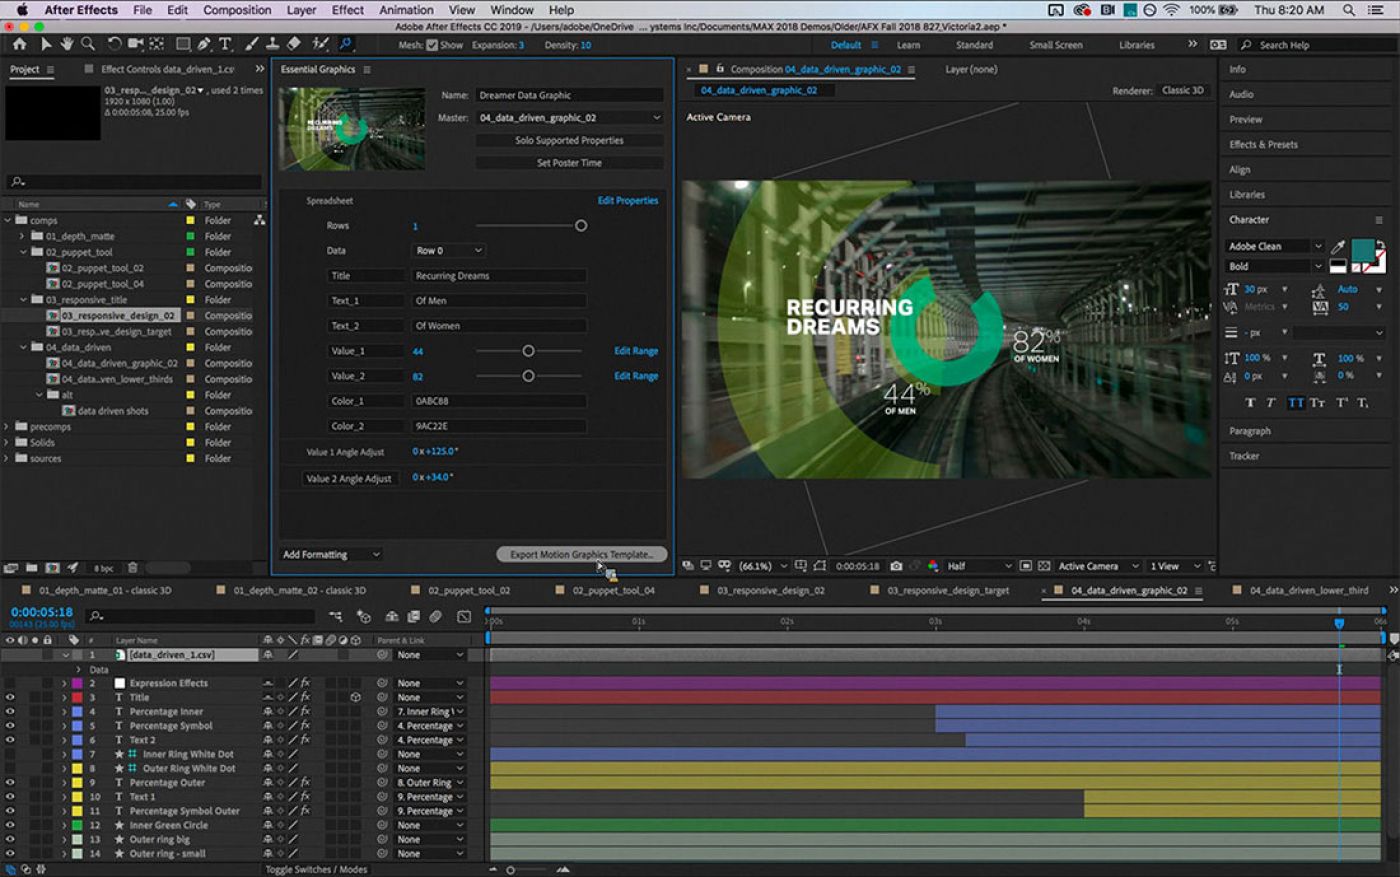 Effects preset. Adobe after Effects. Программа Афтер эффект. After Effects Интерфейс. Adobe after Effects Интерфейс.